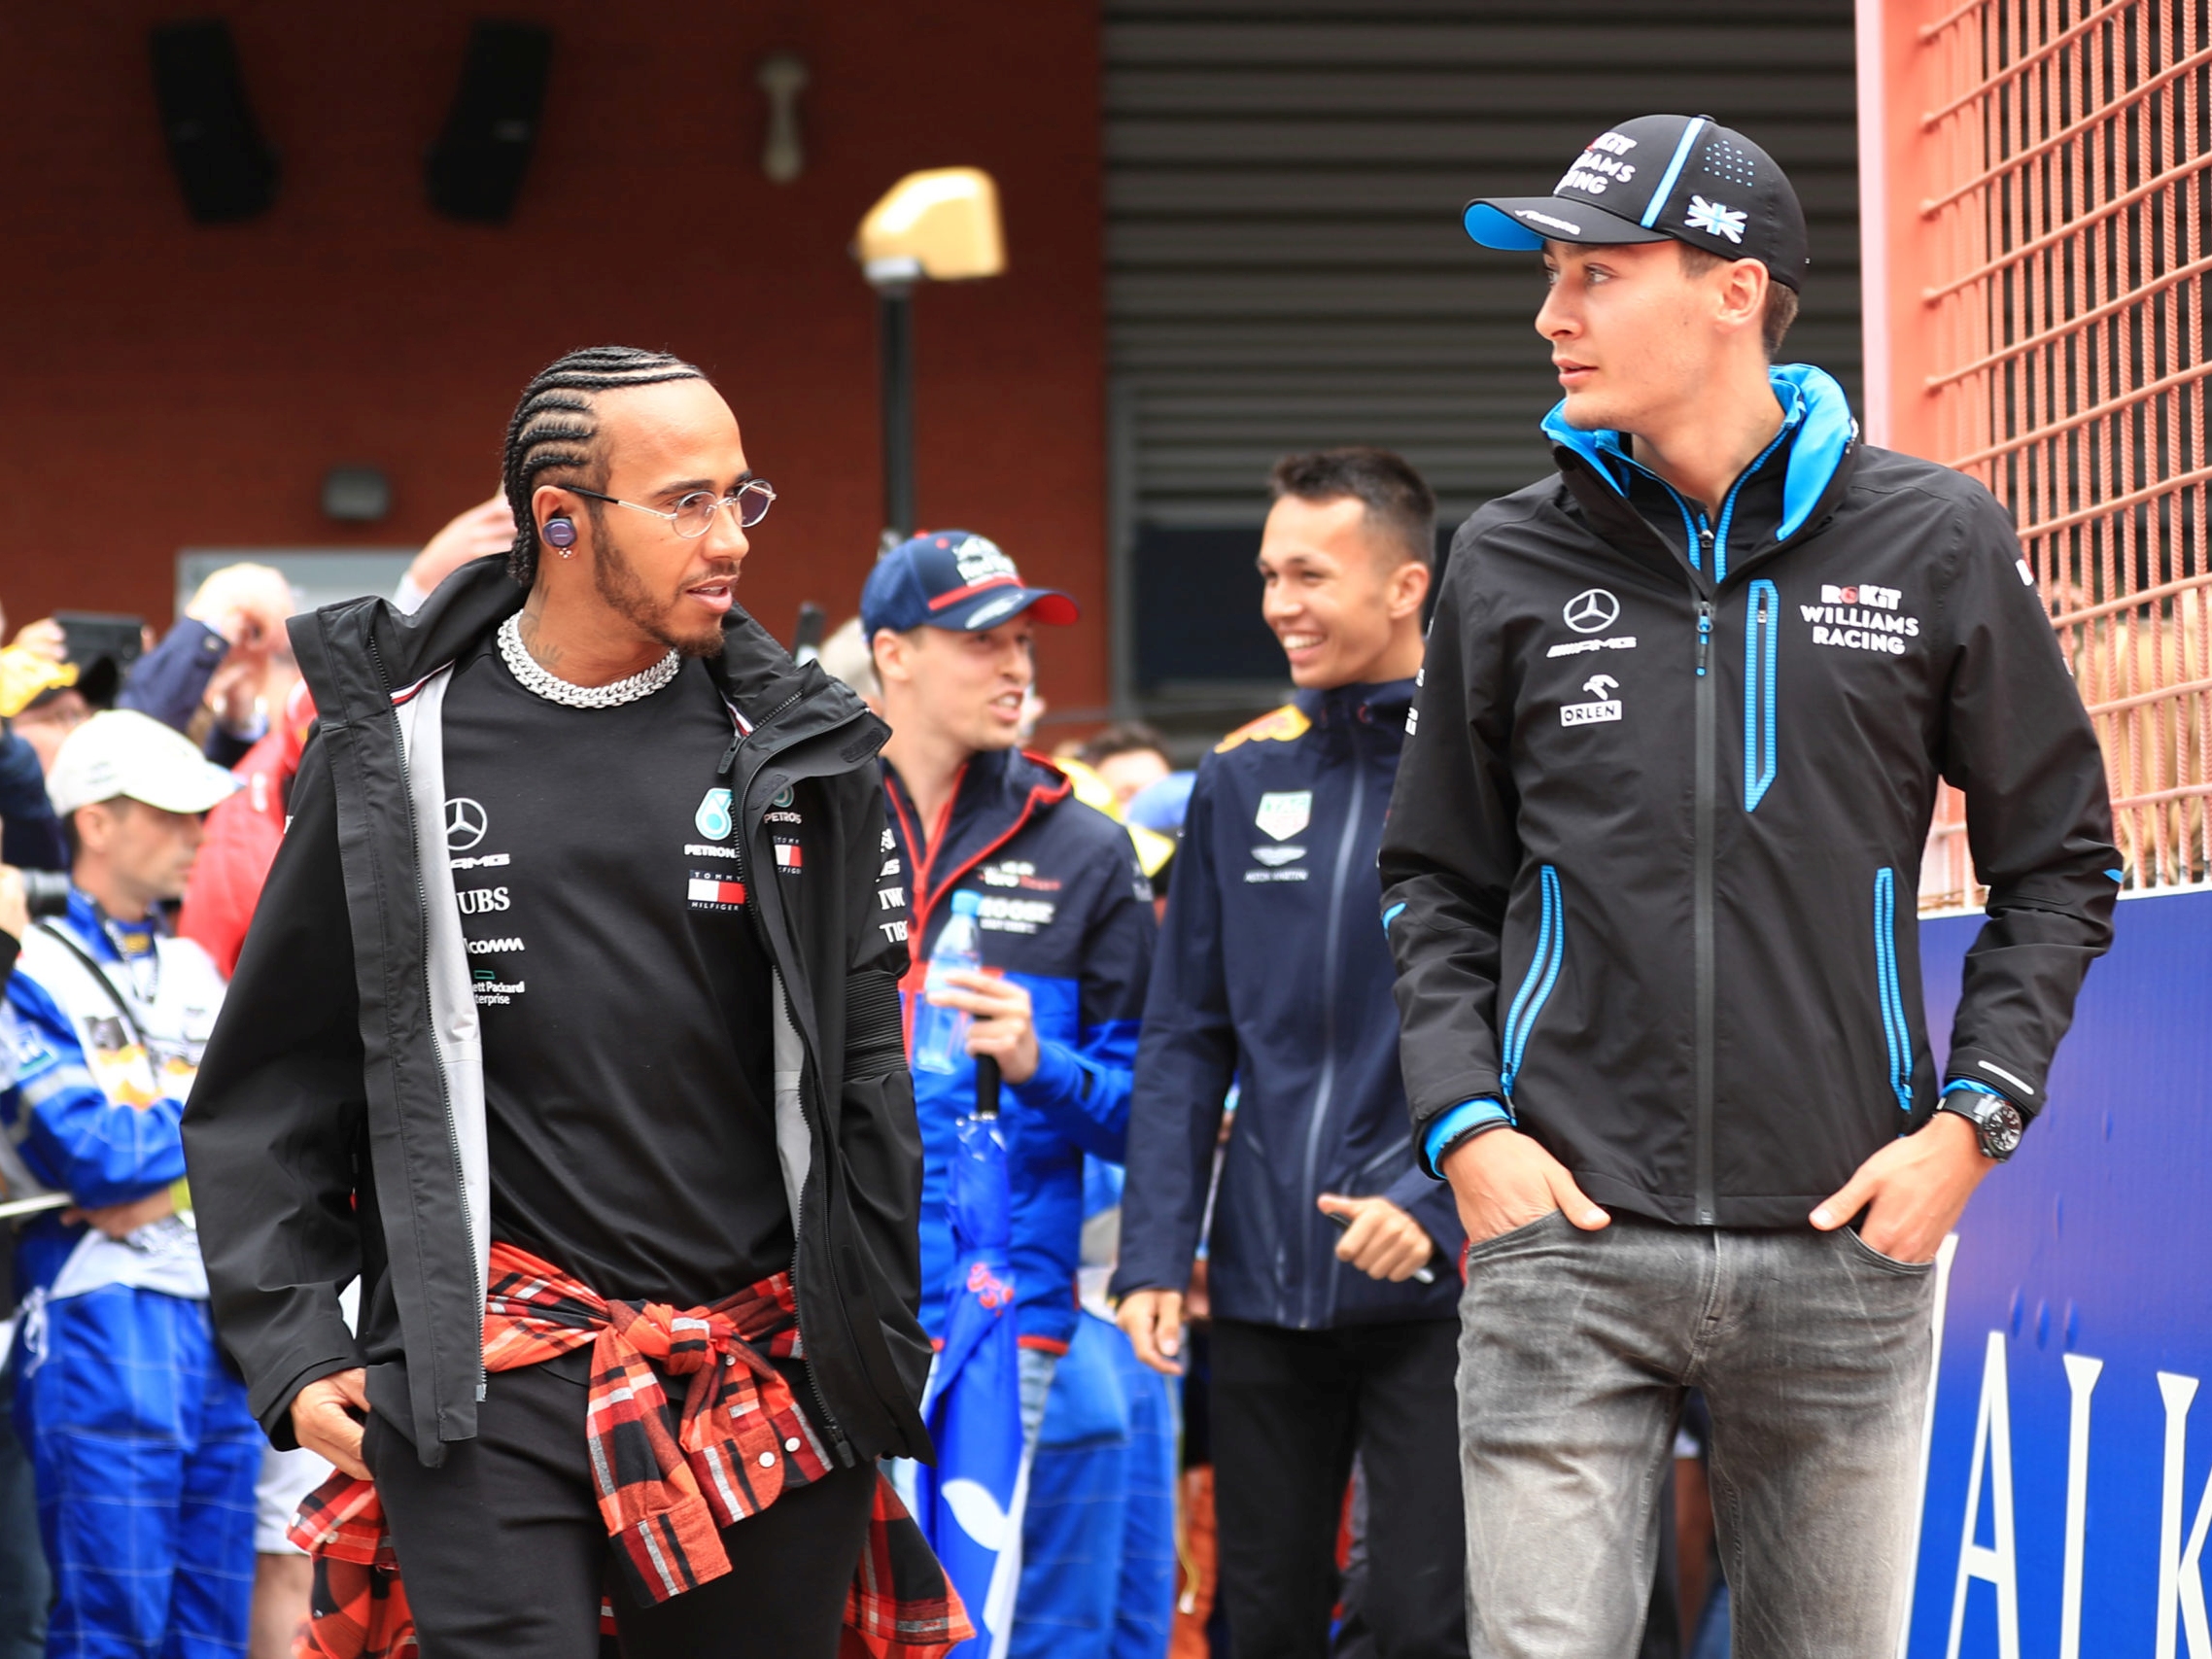 George Russell and Lewis Hamilton cross paths during the 2021 season.